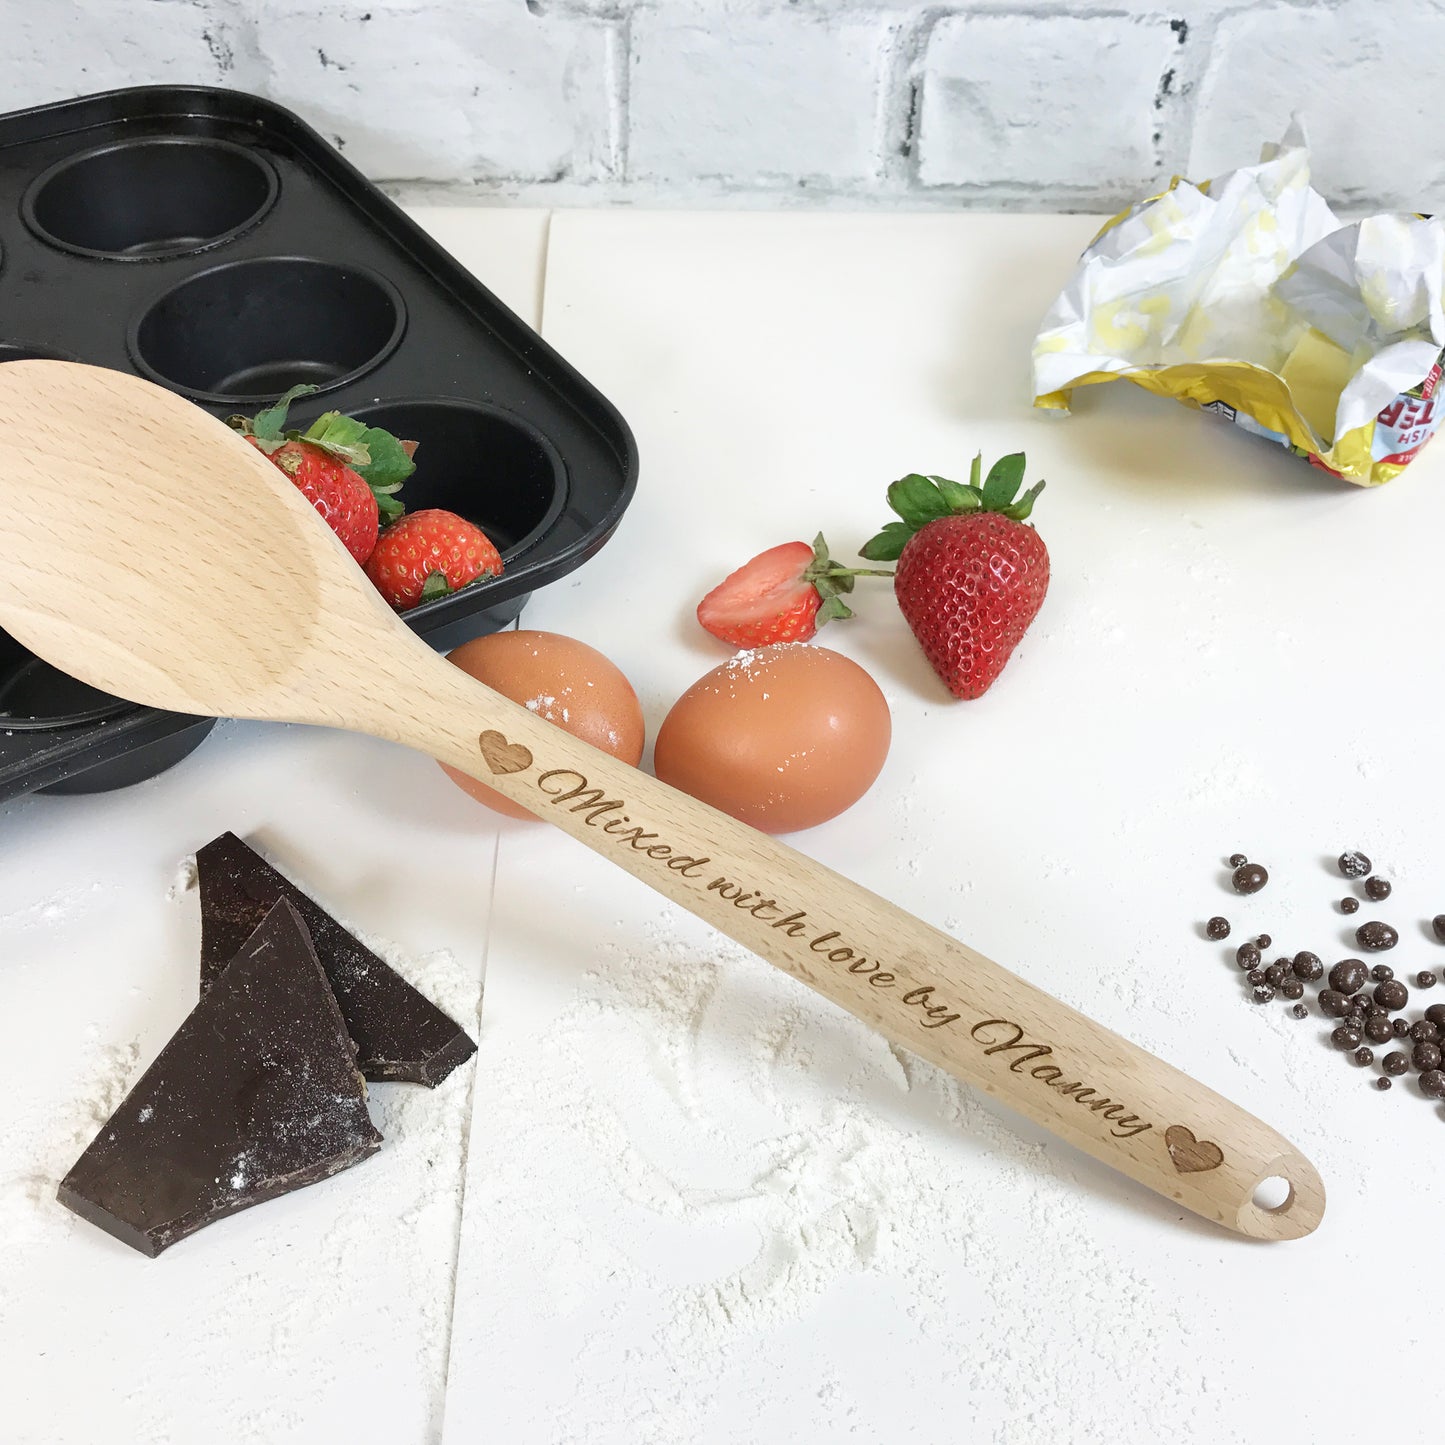 Mixed with Love Wooden Spoon